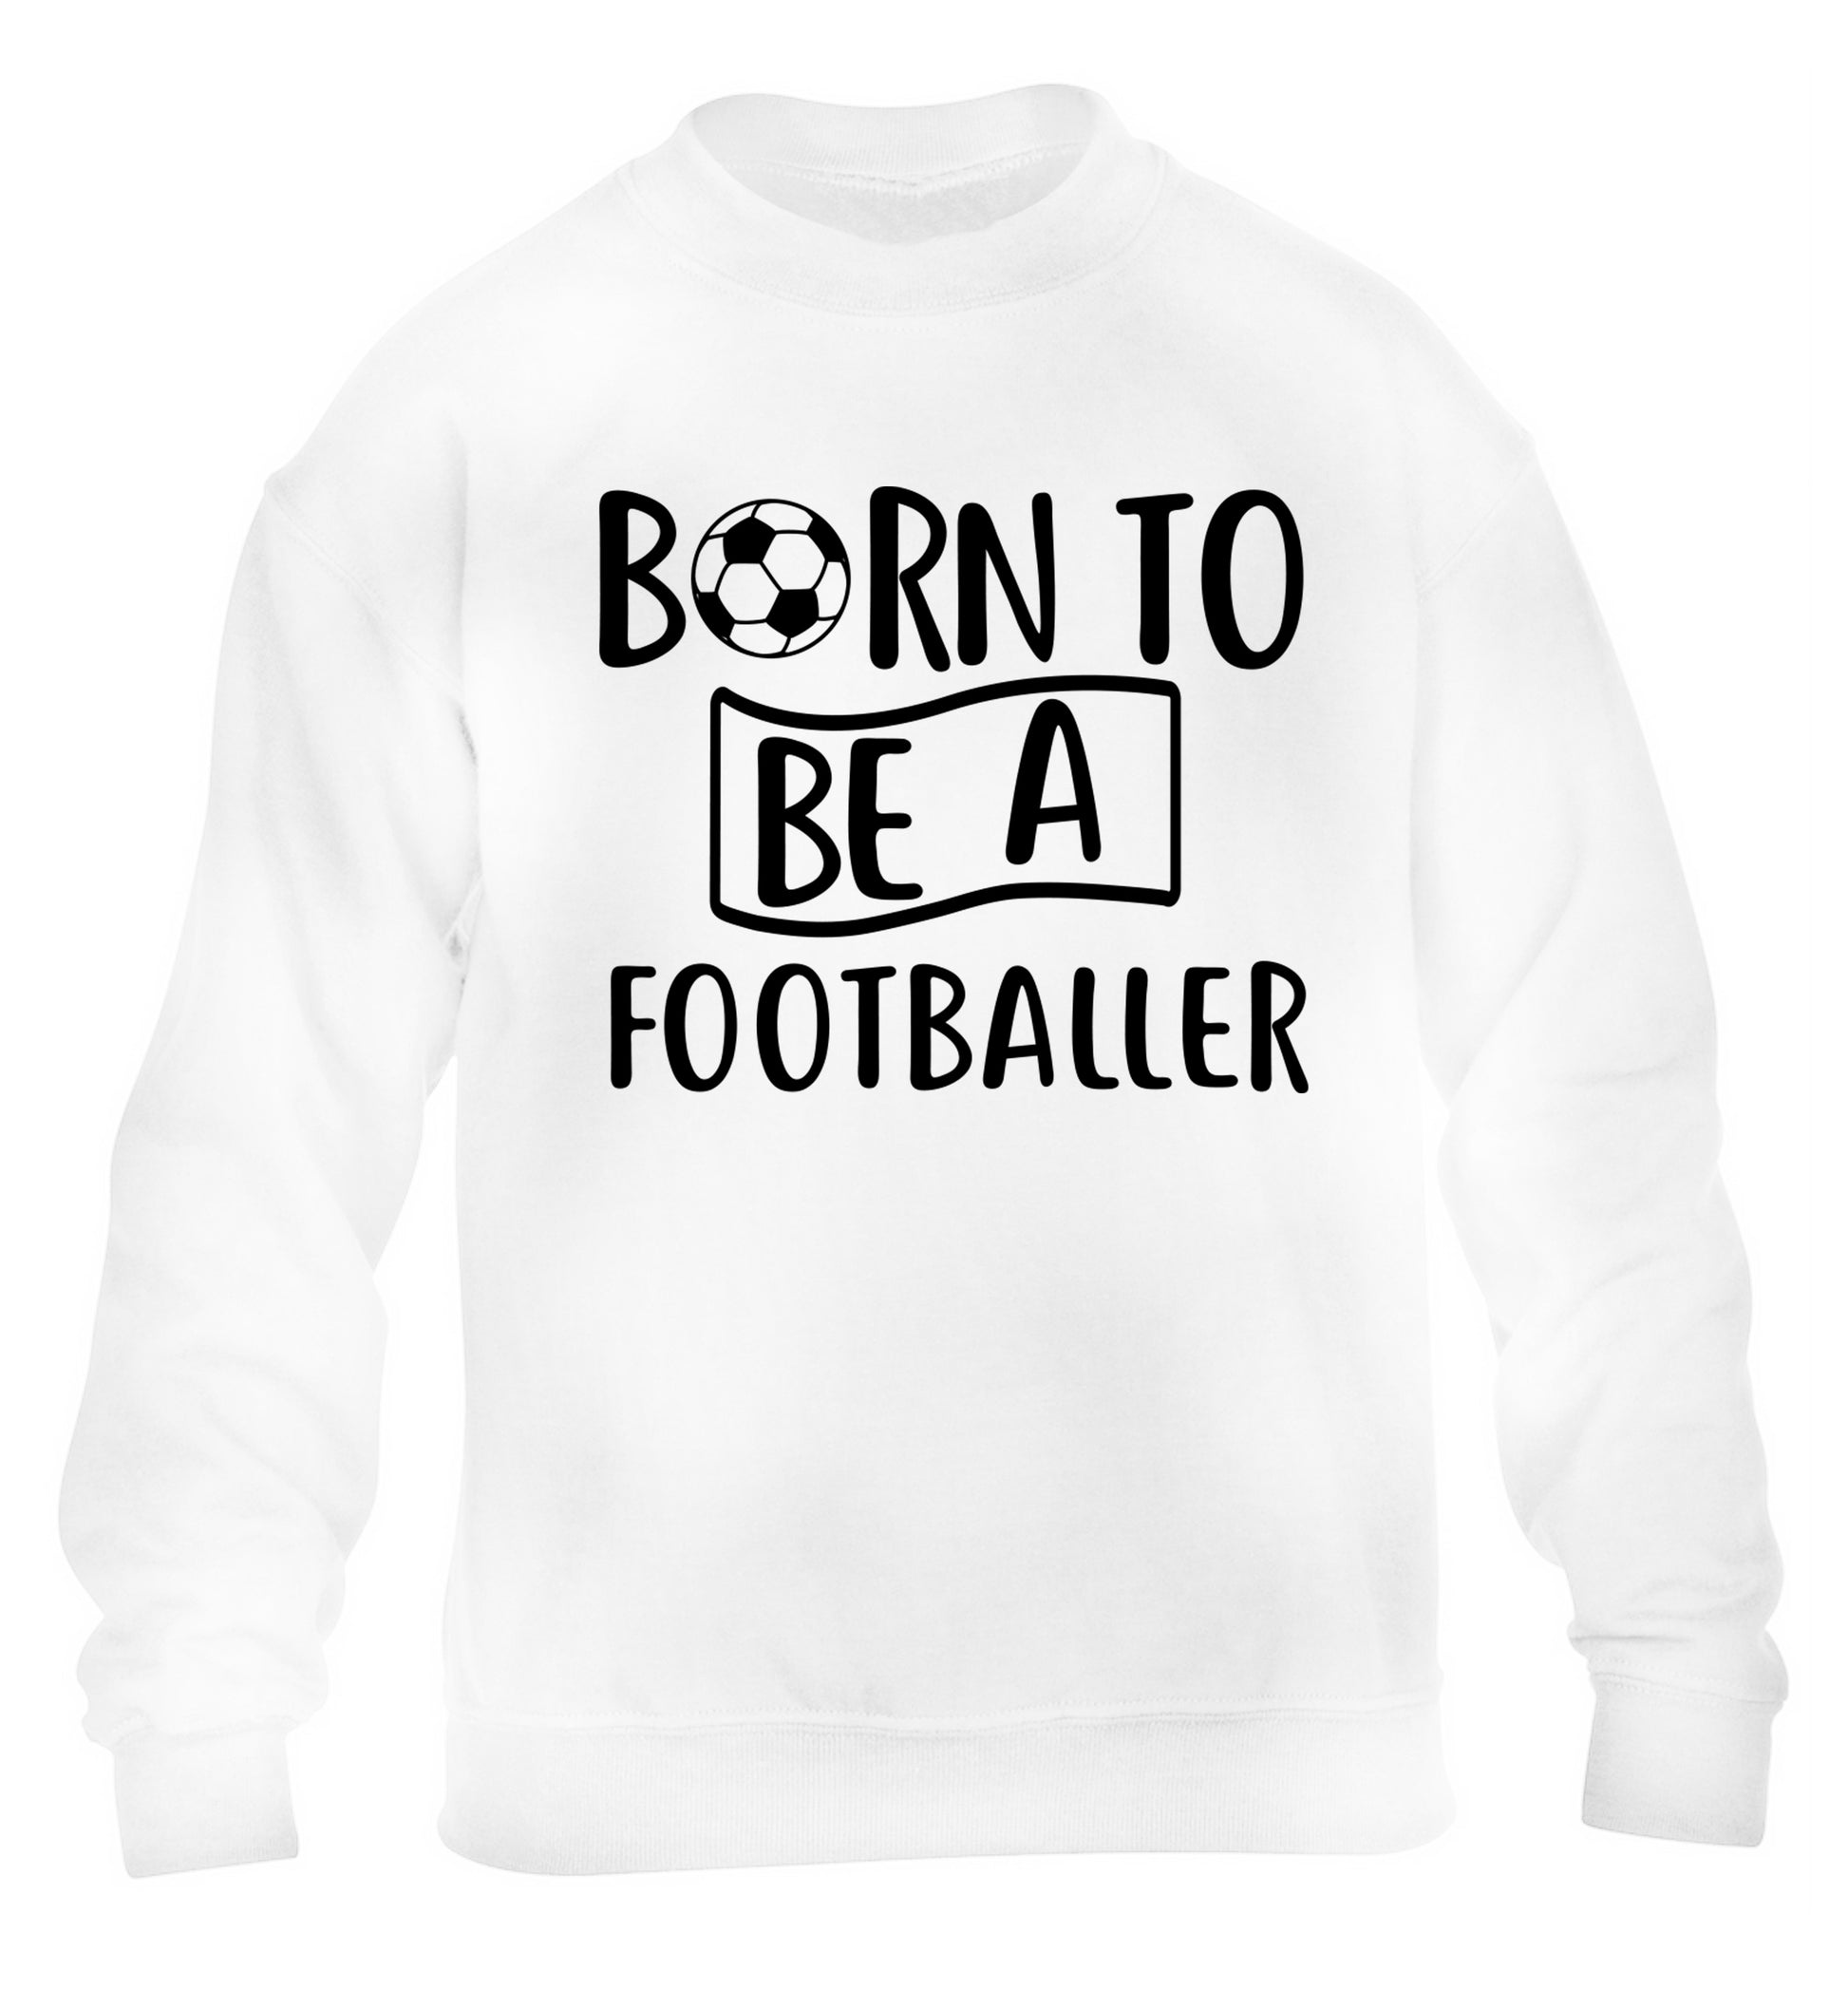 Born to be a footballer children's white sweater 12-14 Years